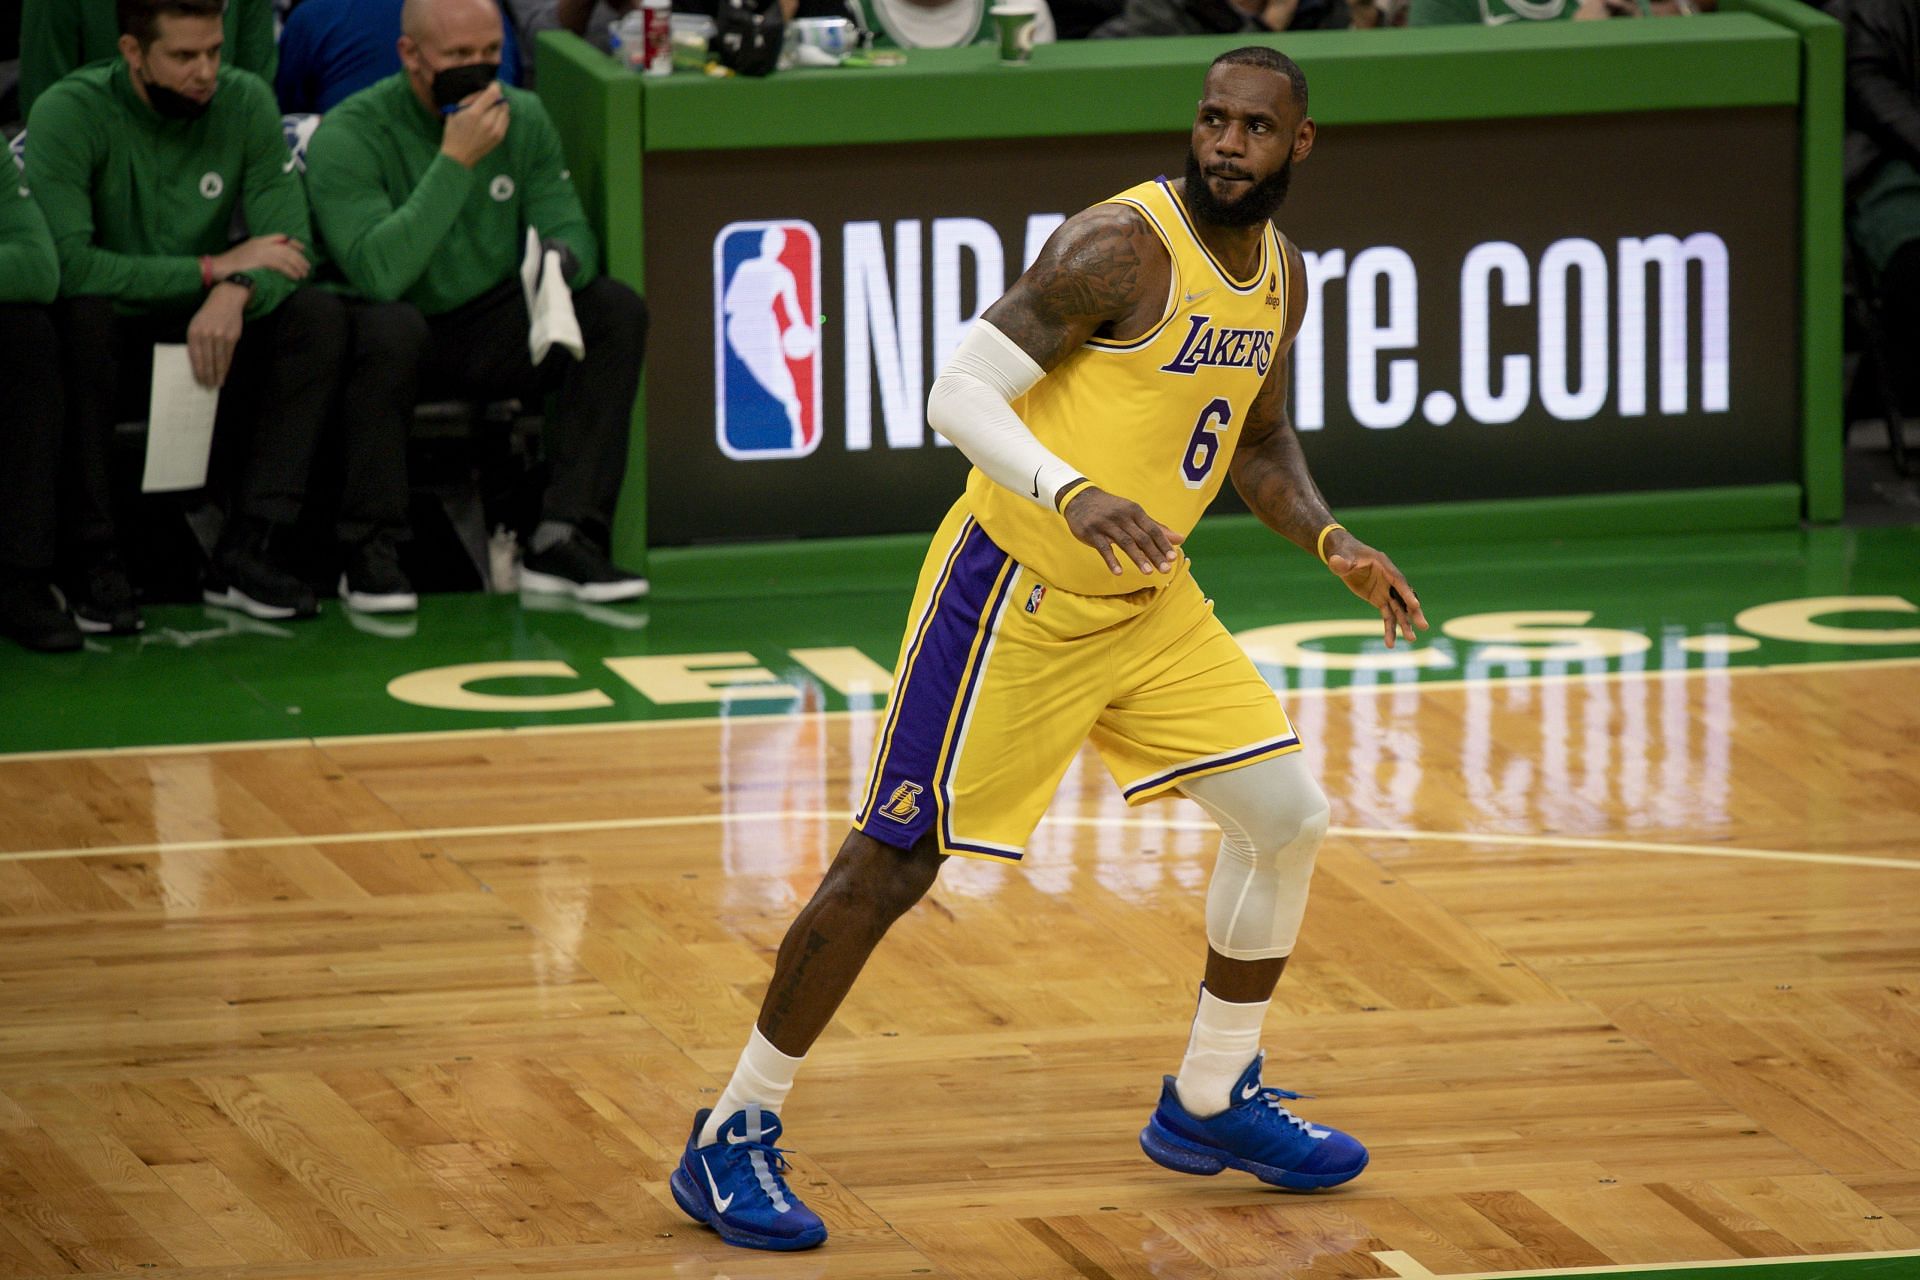 LeBron James in action during the LA Lakers v Boston Celtics game on Friday